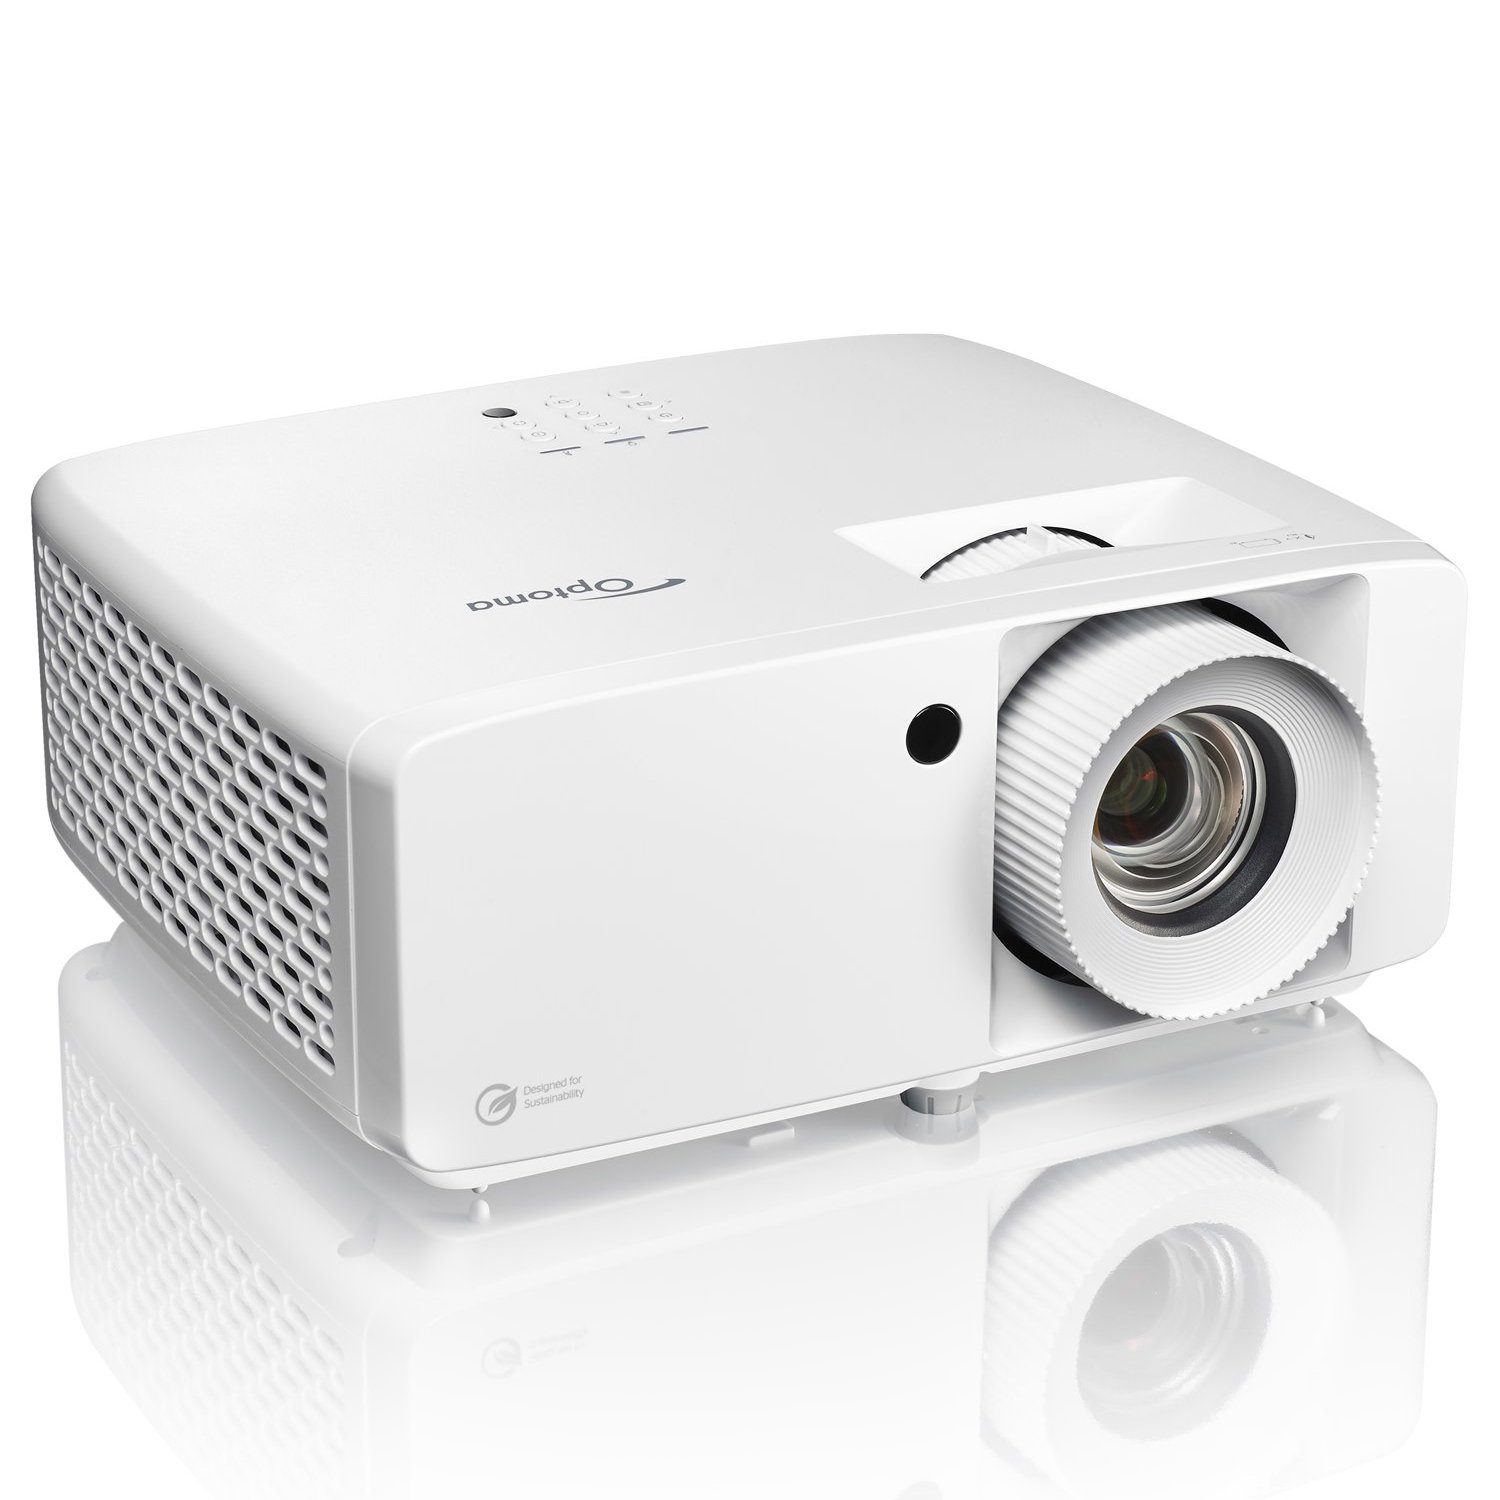 x 3840 3D-Beamer lm, (4200 px) Optoma 2160 ZK450 300000:1,